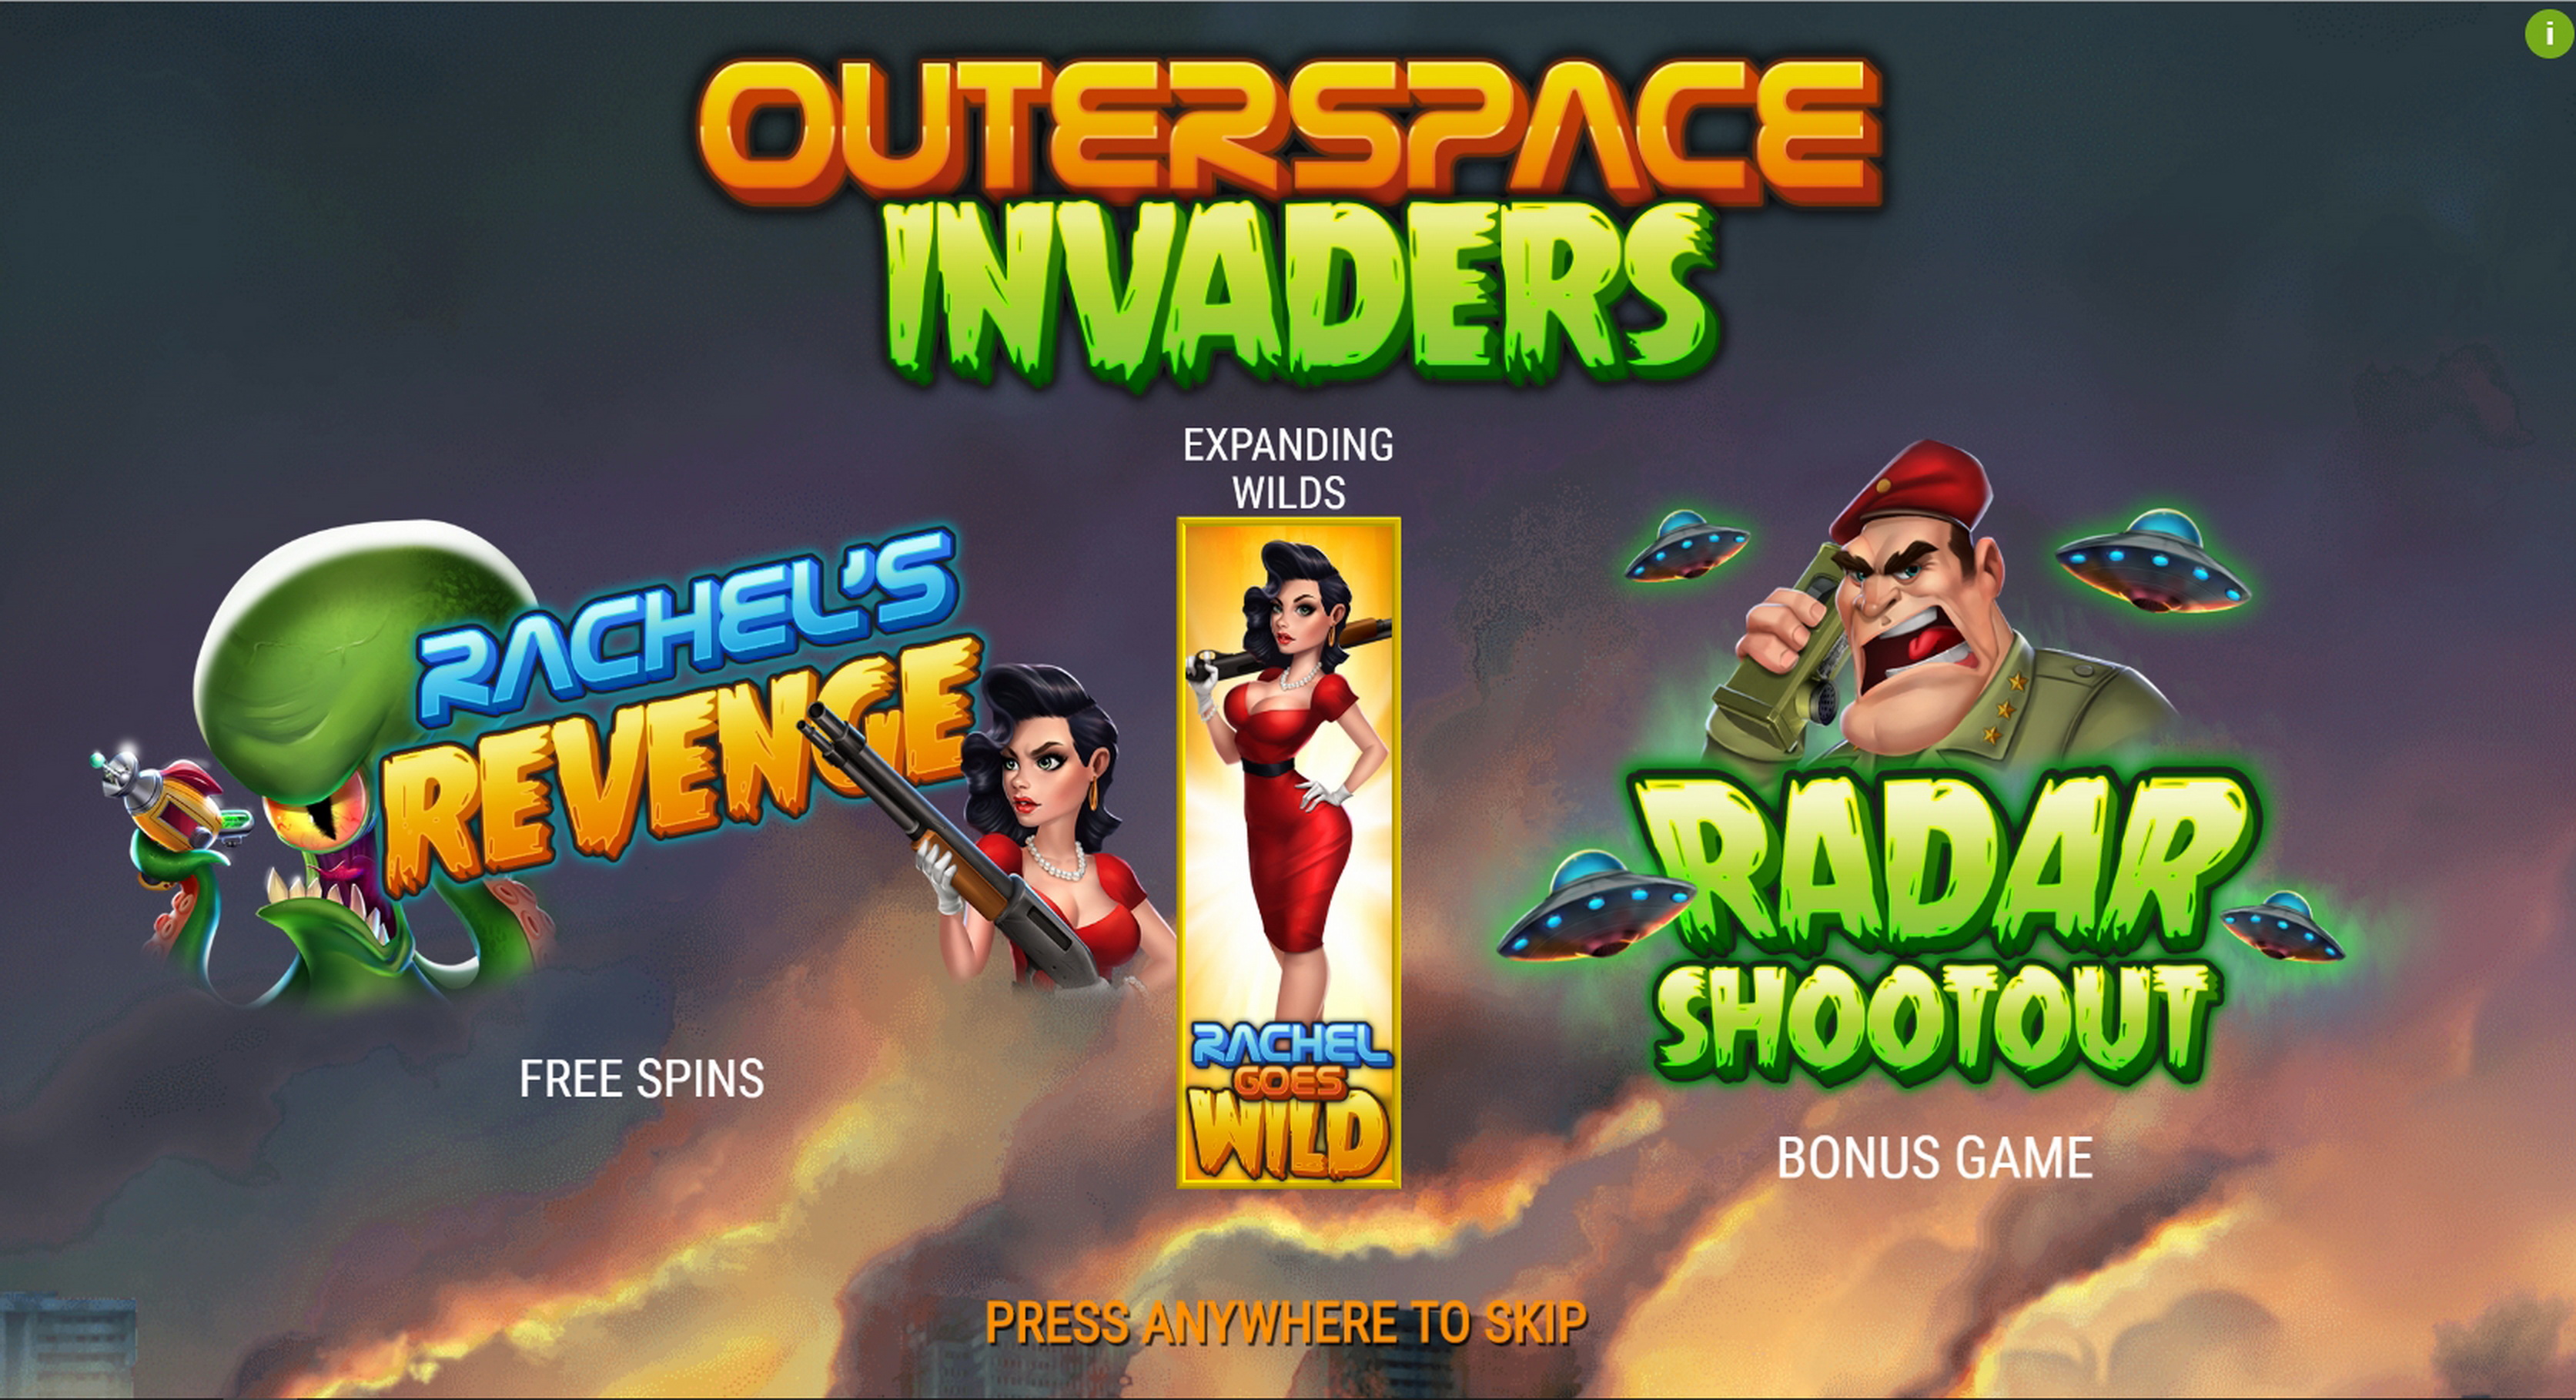 Play Outerspace Invaders Free Casino Slot Game by PearFiction Studios